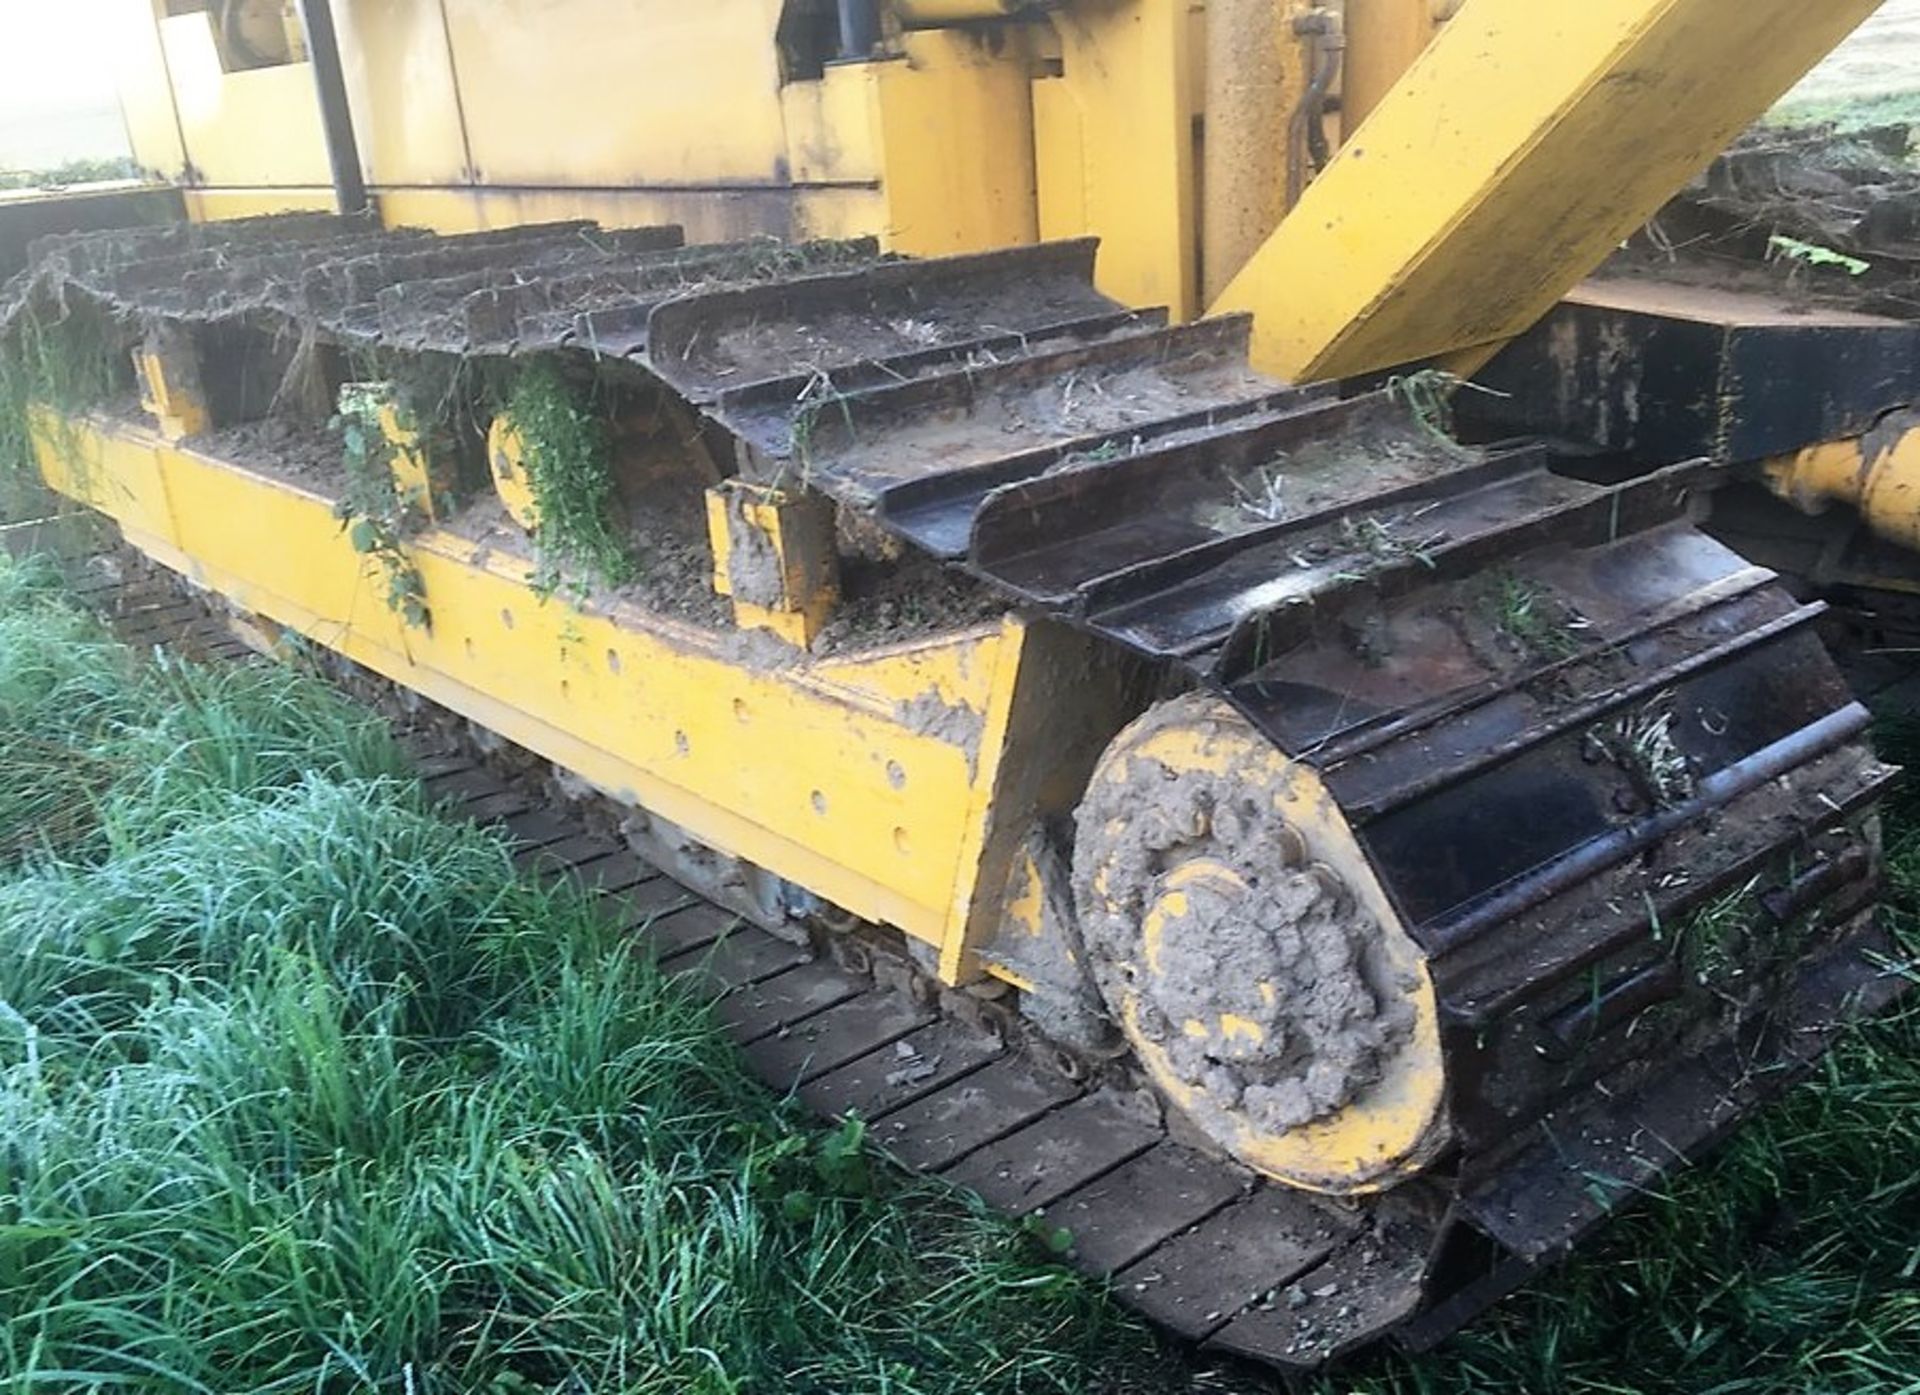 1984 INTER-DRAIN LTD Trenchless. Model 2032GP. S/N D84051. Tracked trencher. Trimble laser control s - Image 16 of 30